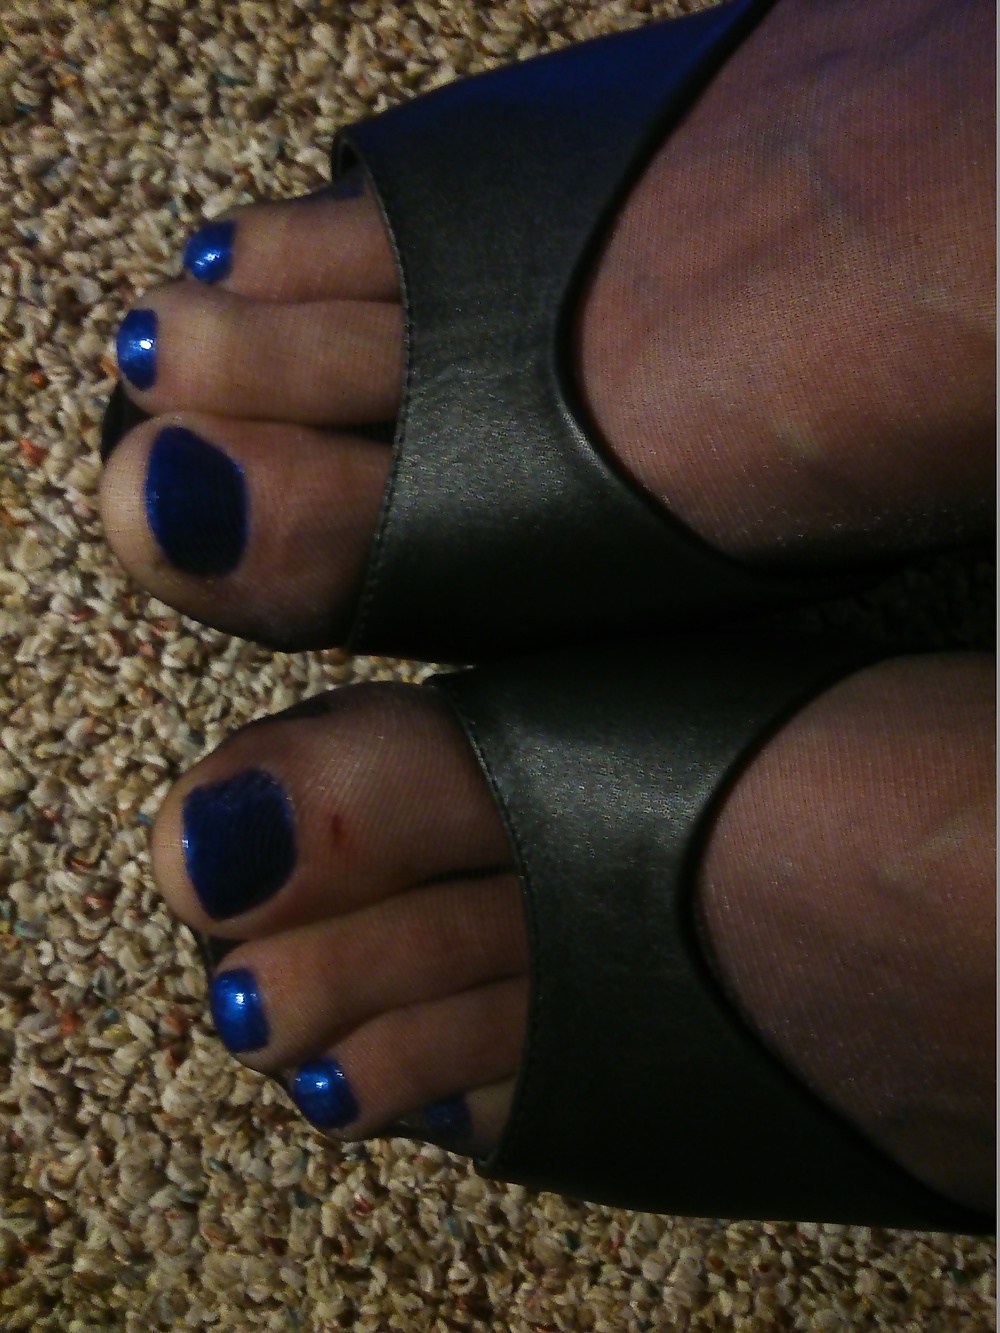 Feet In Black Stockings, Leather High Heels And Blue Polish #33374564